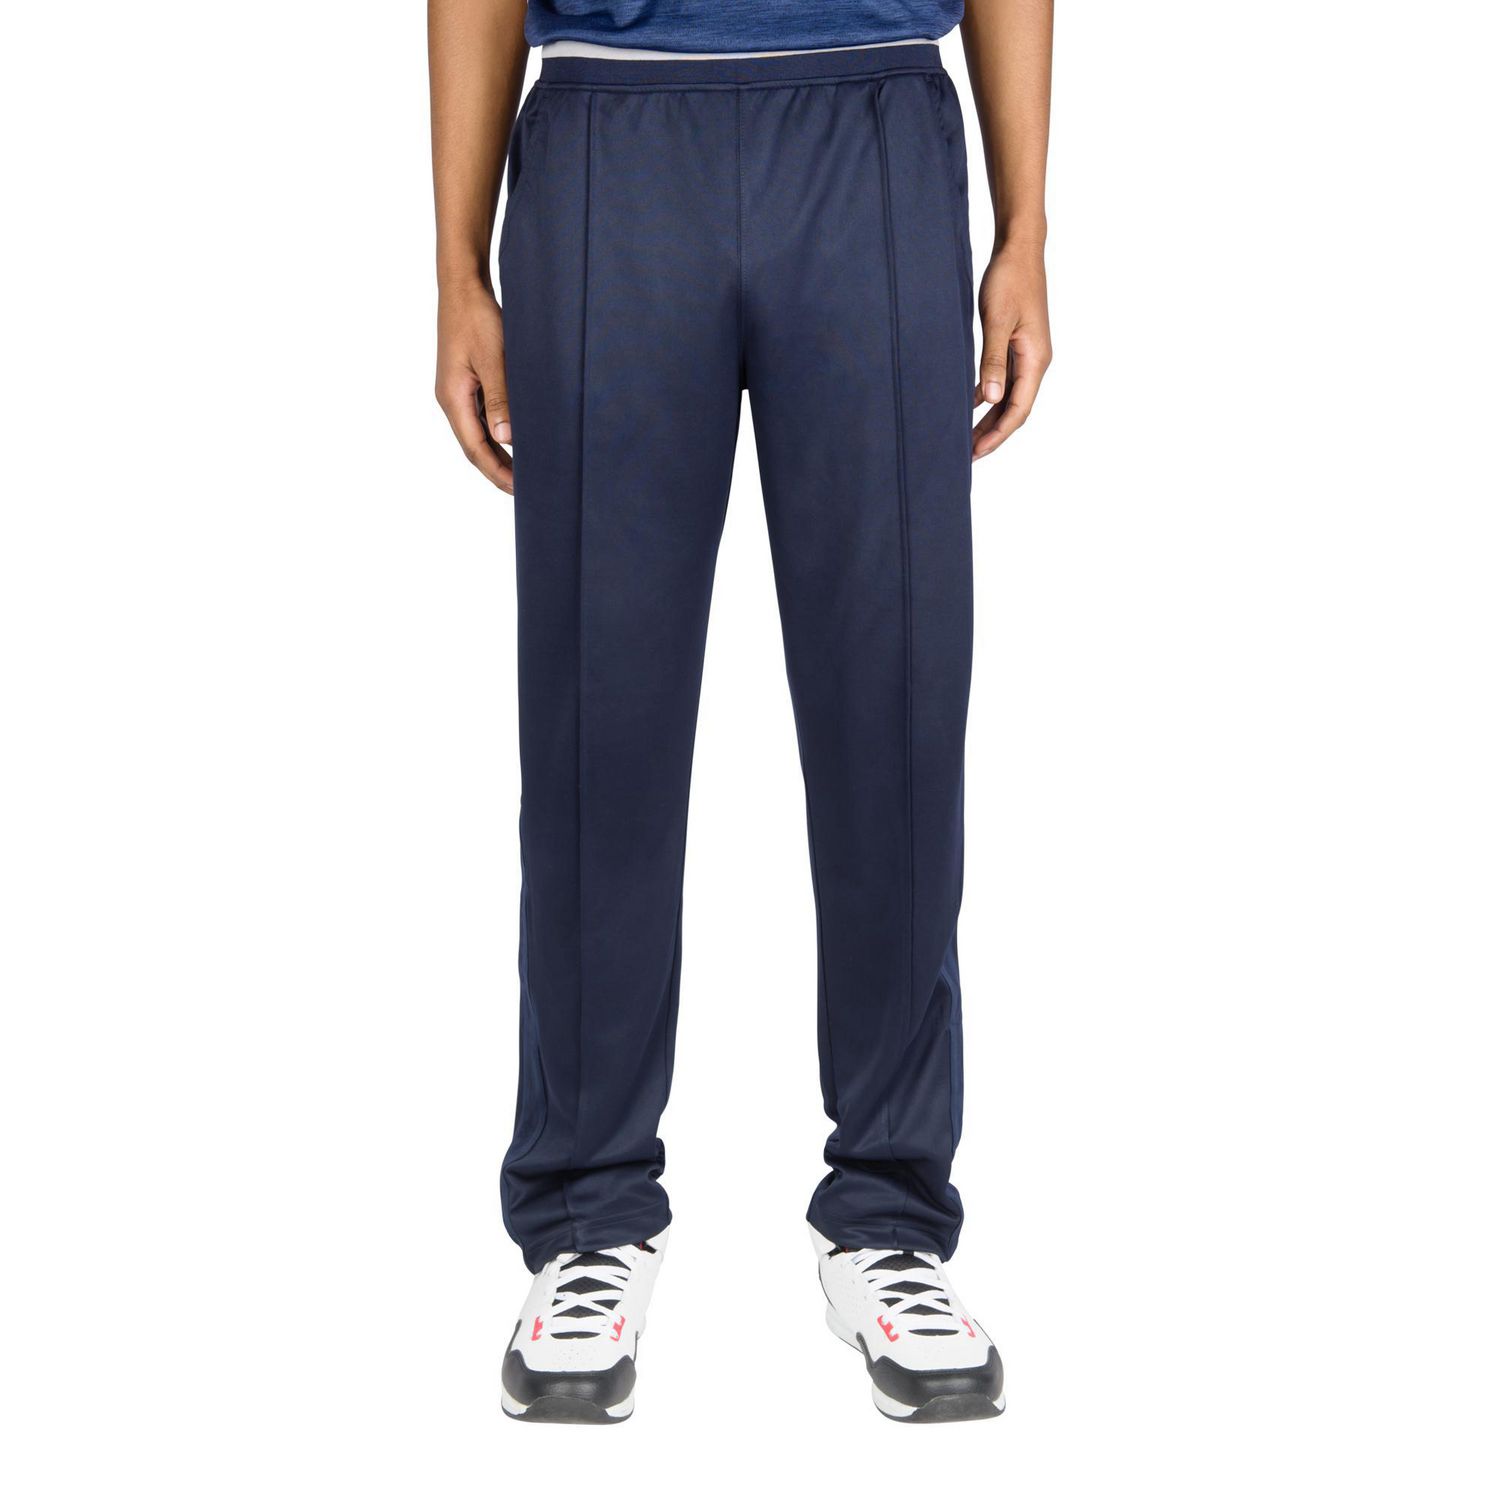 AND1 Men's Alley Oop Bball Pant | Walmart Canada